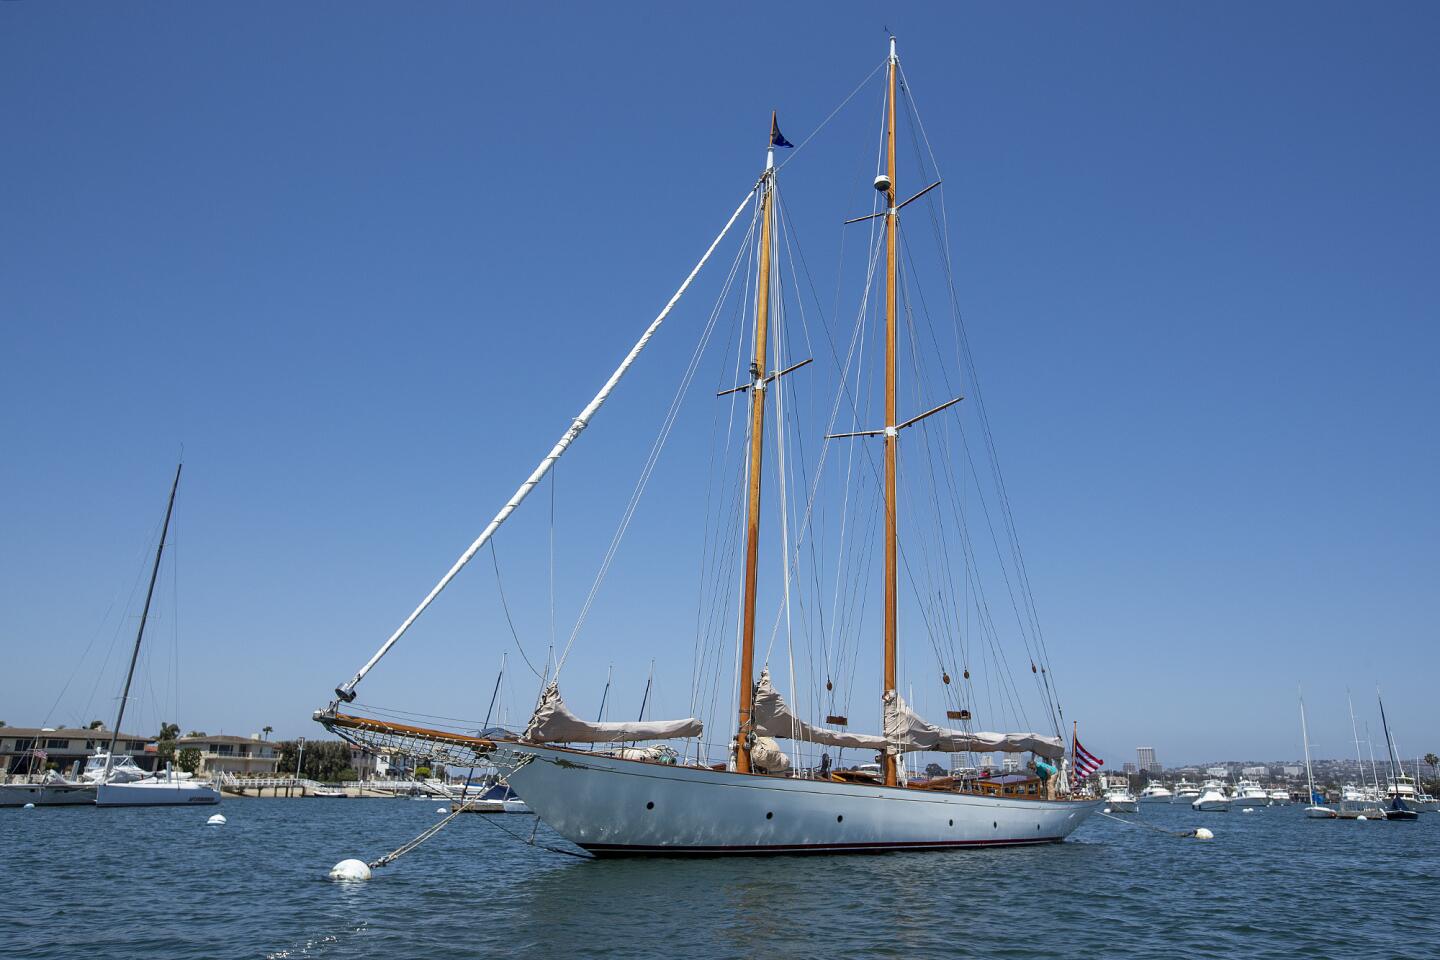 Richard and Lani Straman's 95-year-old, 86-foot schooner Astor will be among the vessels on display in the Newport Beach Wooden Boat Festival.